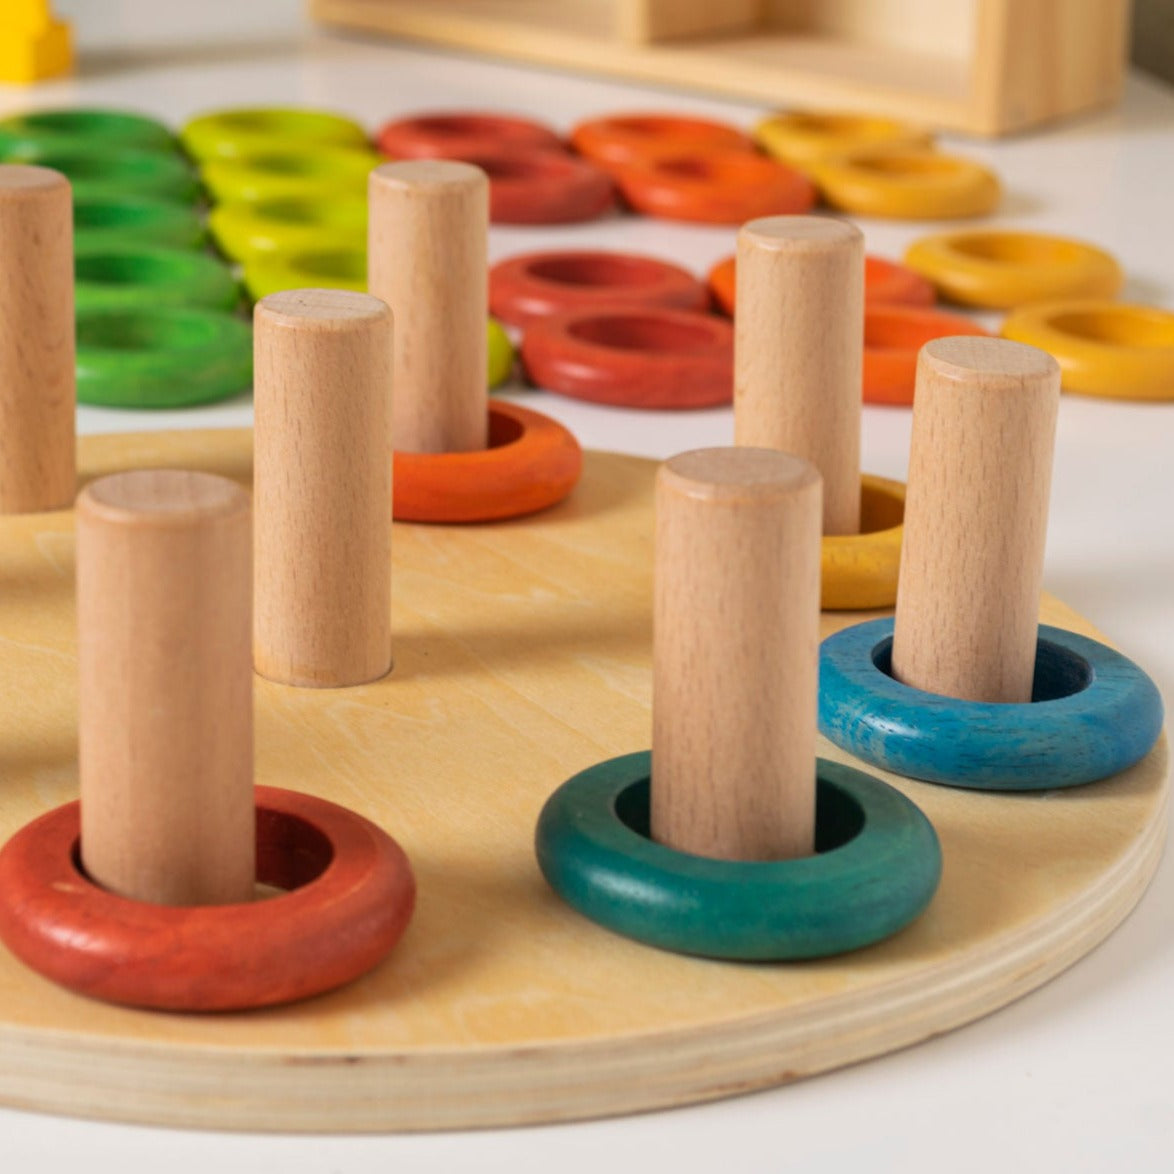 Hooping Rings, Introducing our Hooping Rings 9-piece wooden ring set, designed to inspire creativity and learning in young children! The Hooping Rings set is made from sustainably sourced beech wood, rubber wood, and plywood, this set is both durable and eco-friendly.Featuring 5 rings in each bright and engaging colour, children can use their imaginations to stack the rings in order, create patterns, or even come up with their own designs. The possibilities are endless with this open-ended set!Not only is t